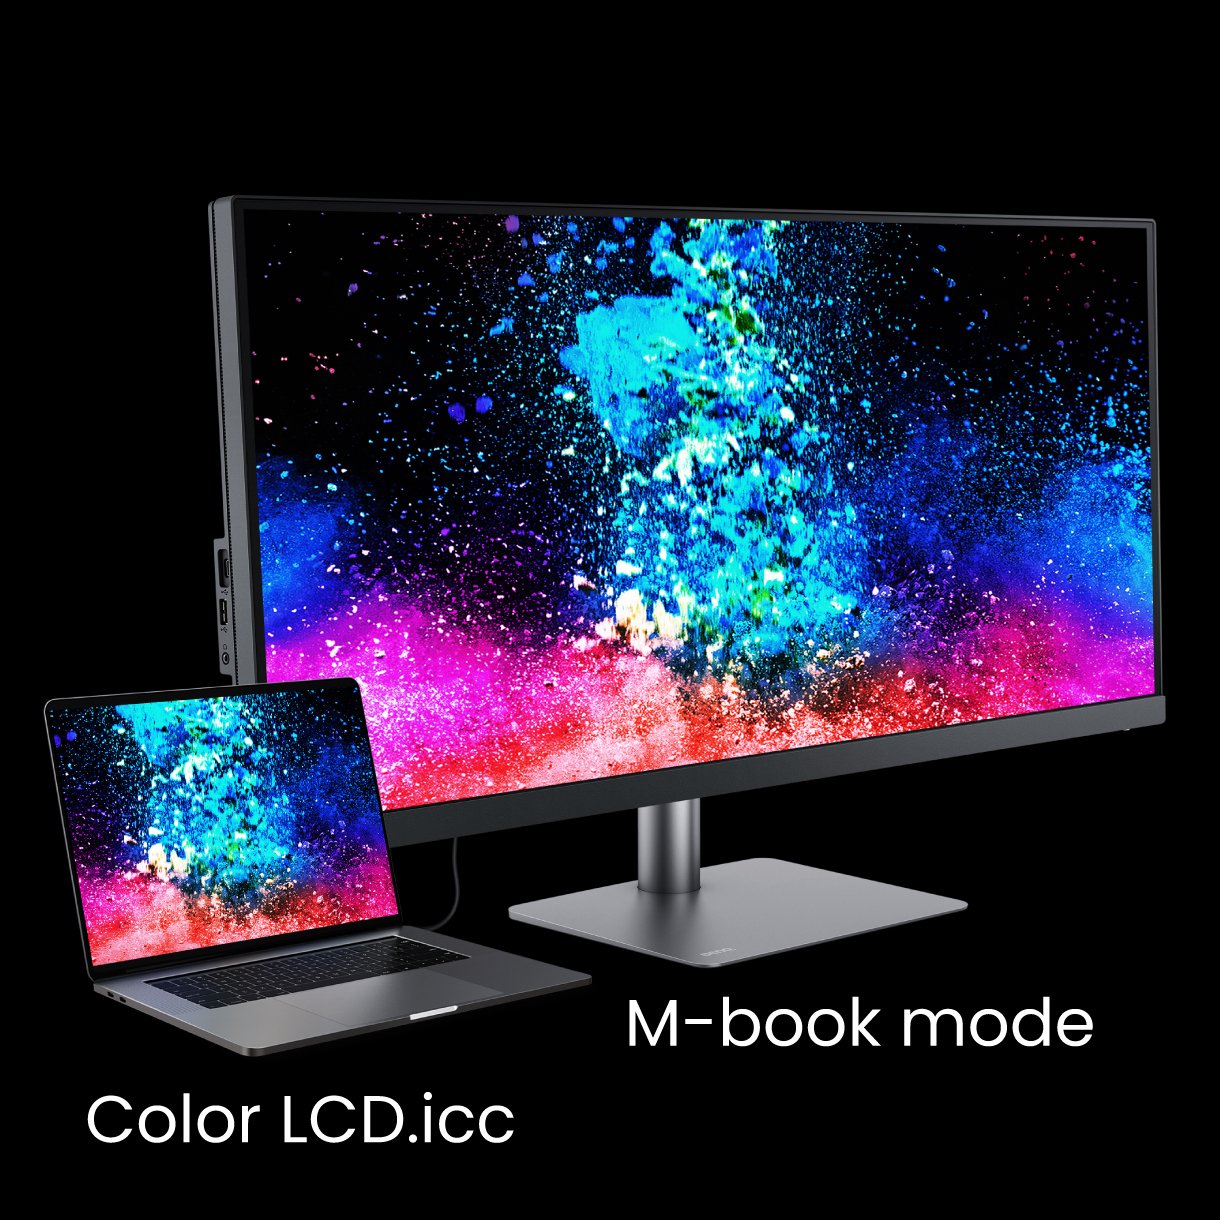 BenQ PD3420Q ships from the factory with default color settings that perfectly match Mac® and MacBook® Pro laptop colors and BenQ exclusive M-Book mode on the PD3420Q provides active color syncing between Macs and the monitor while you work.